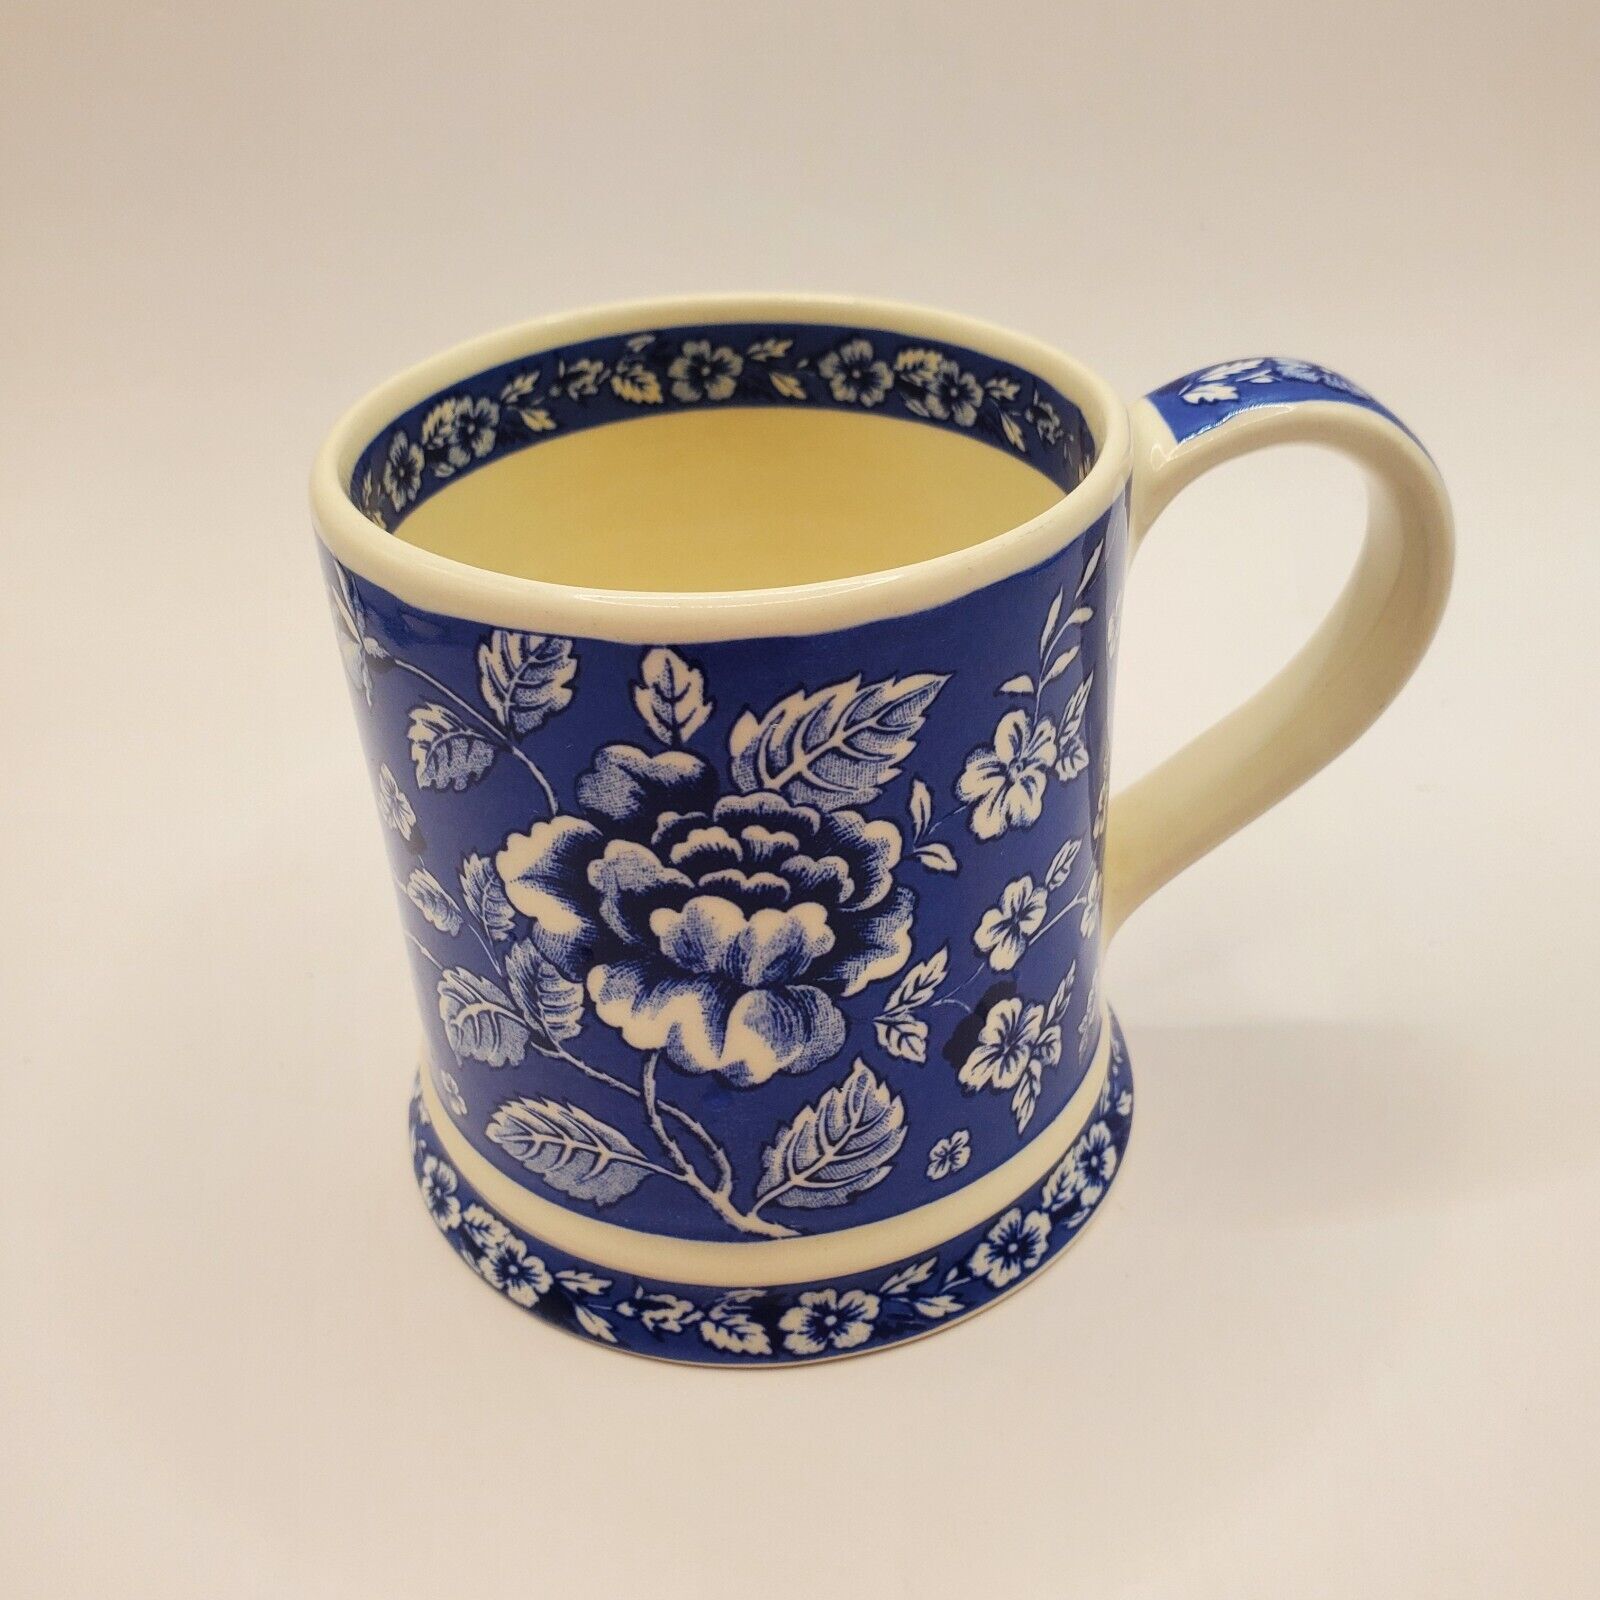 The afternoon tea collection England blue and white mug